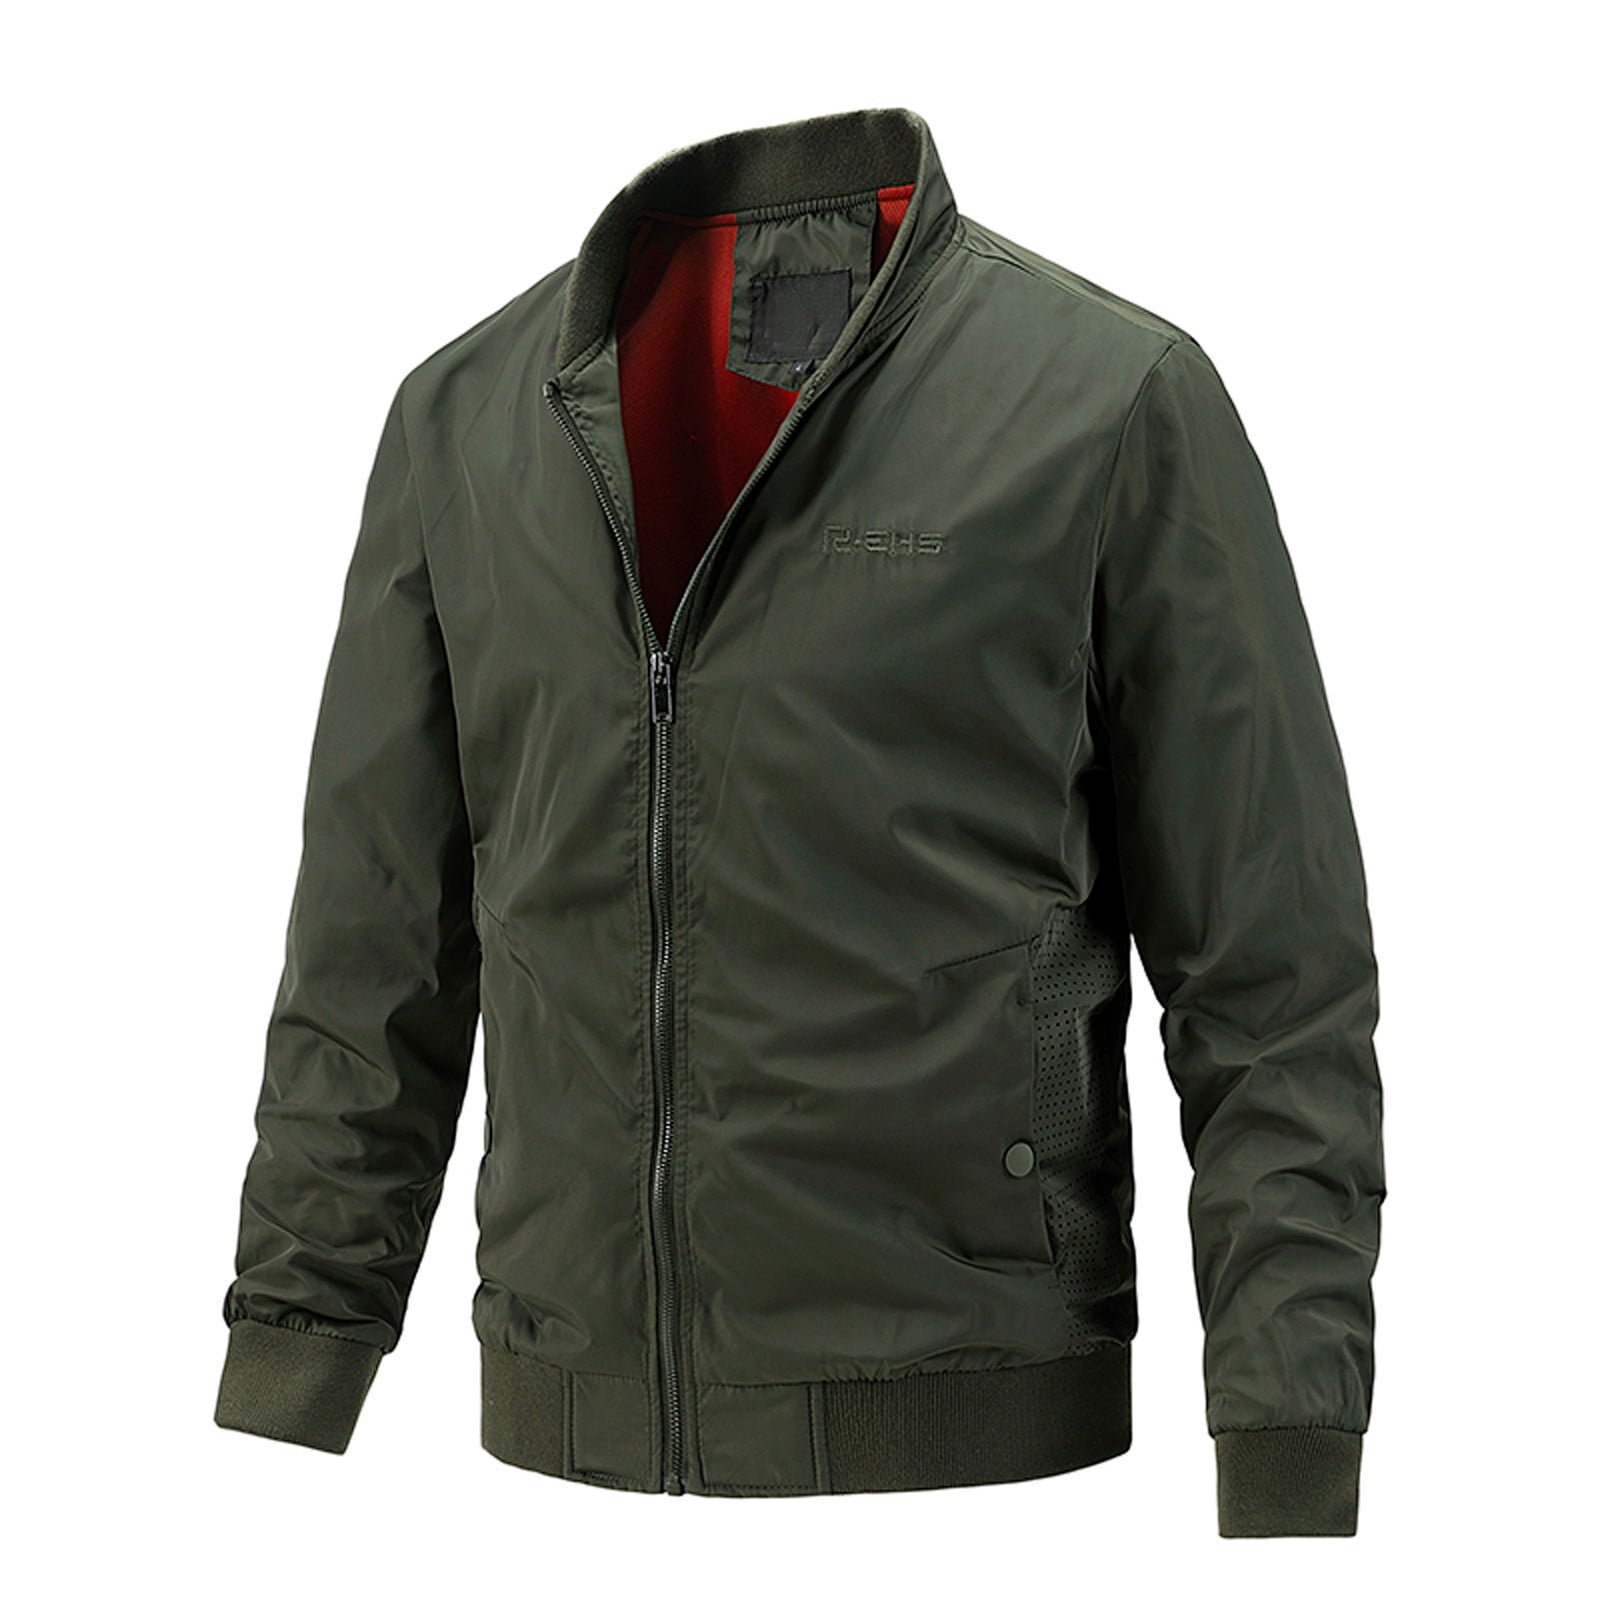 Lambretta MA1 Bomber Jackets Two Styles 3 Colours All Sizes Mods Skins, 